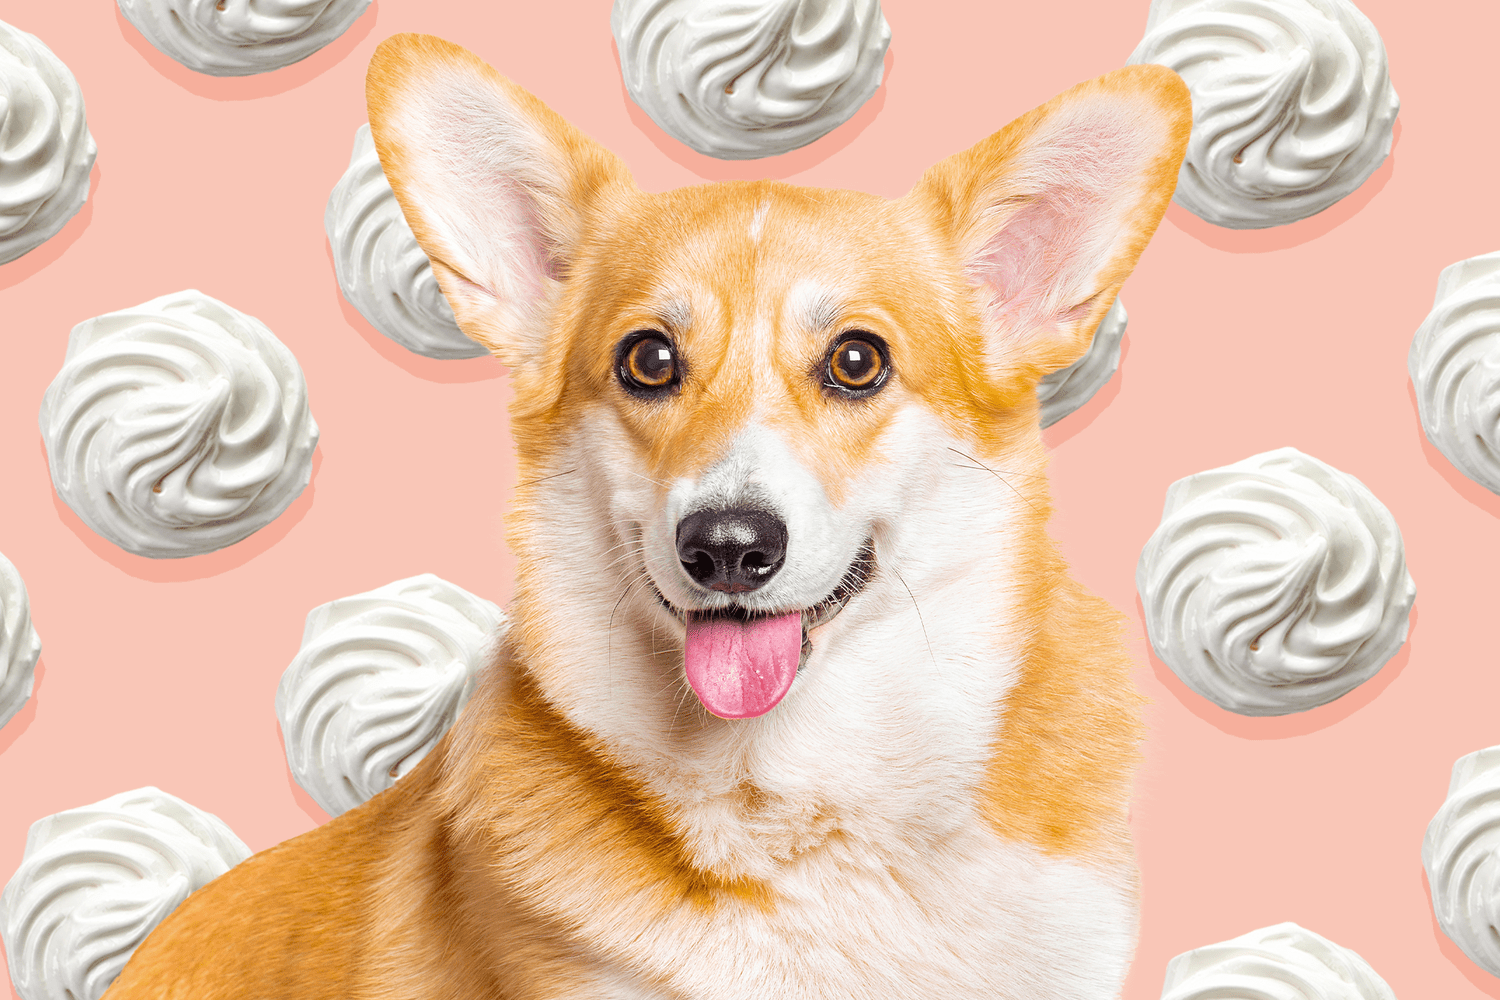 dog with background of whipped cream; can dogs eat whipped cream?